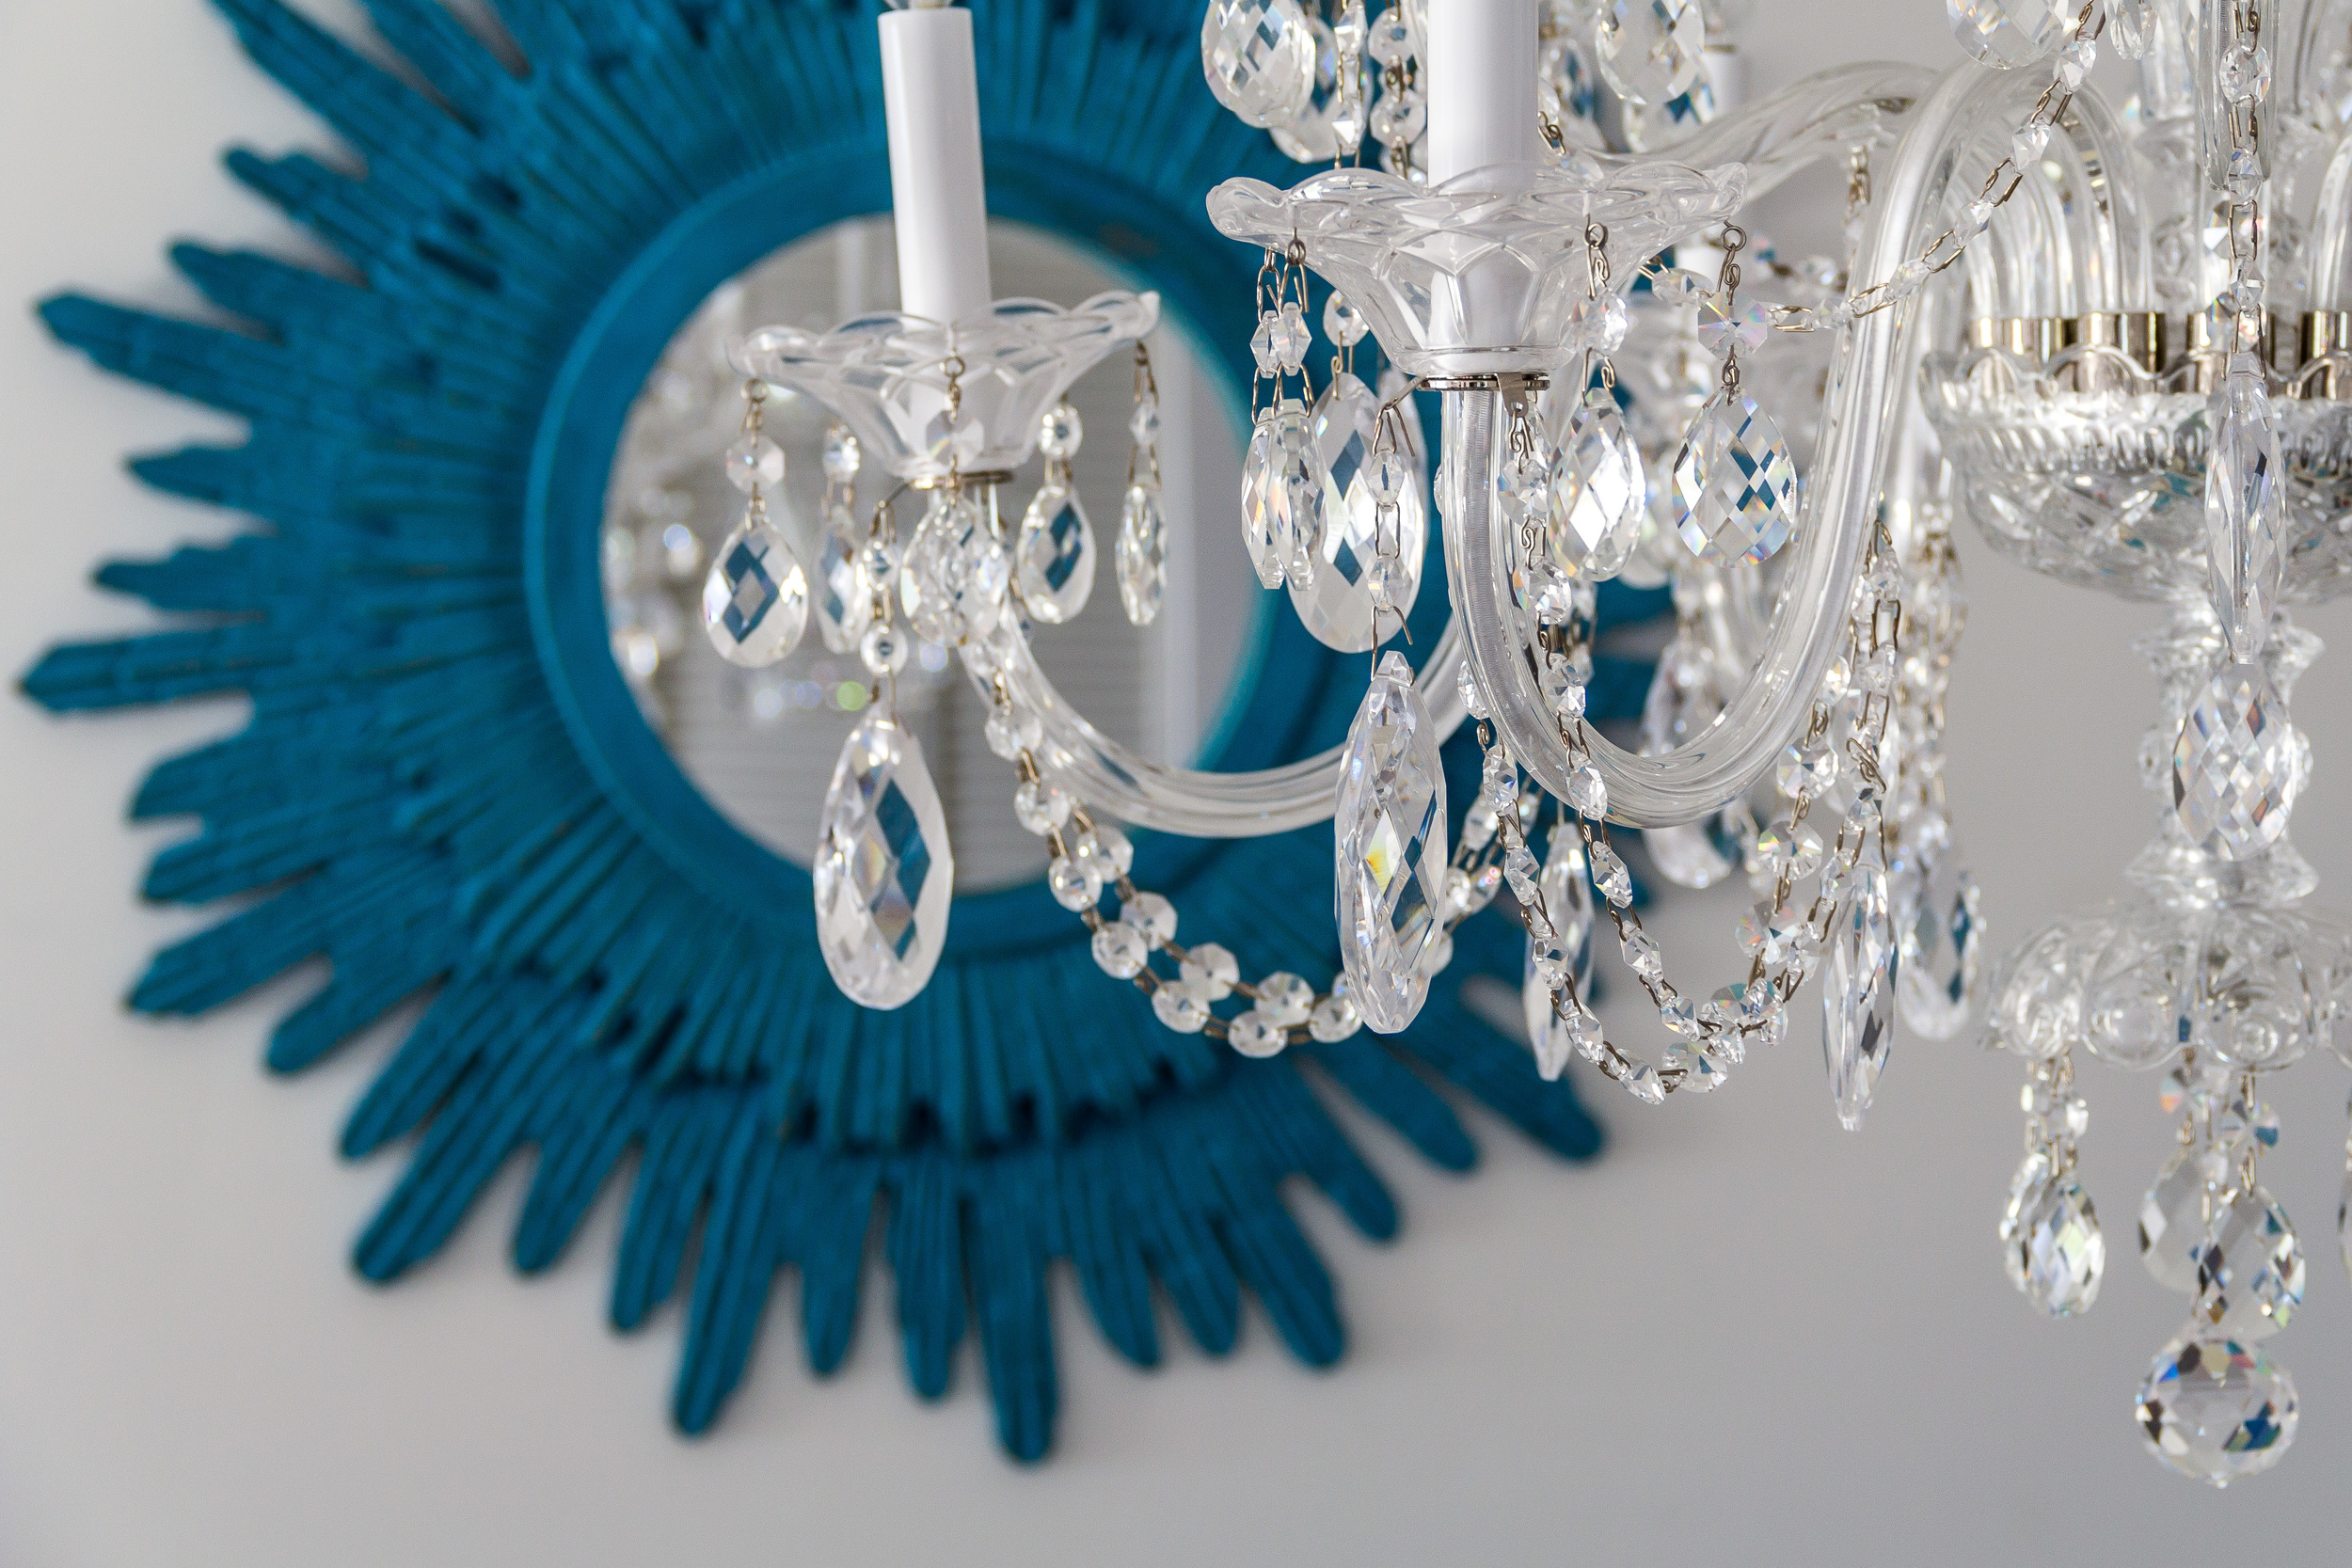 a decorative image of a chandelier and a mirror